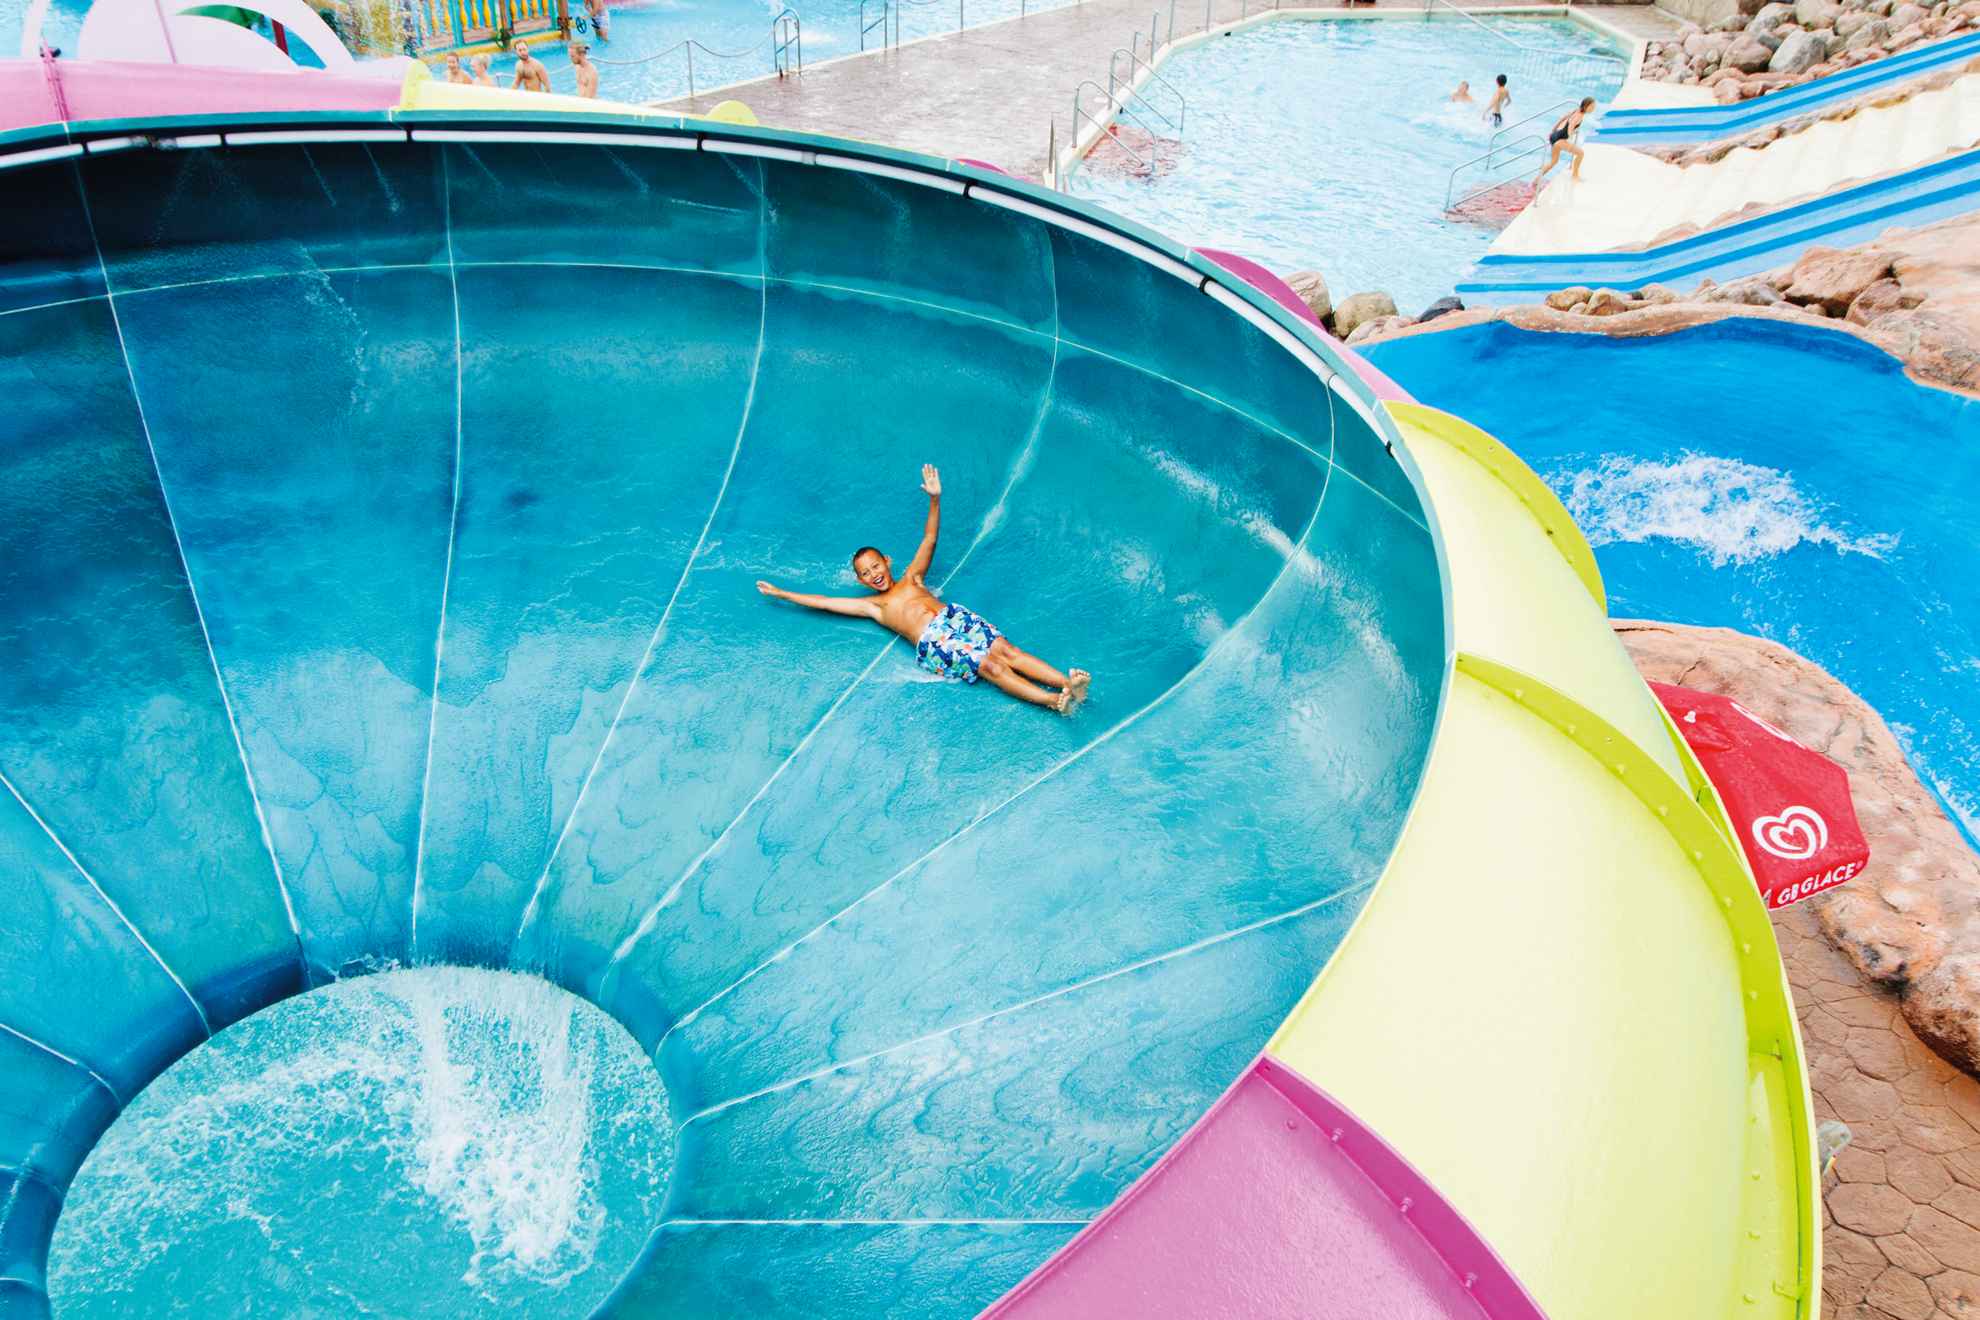 Young boy riding a colorful water slide at Skara Sommarland with the pool area in the background